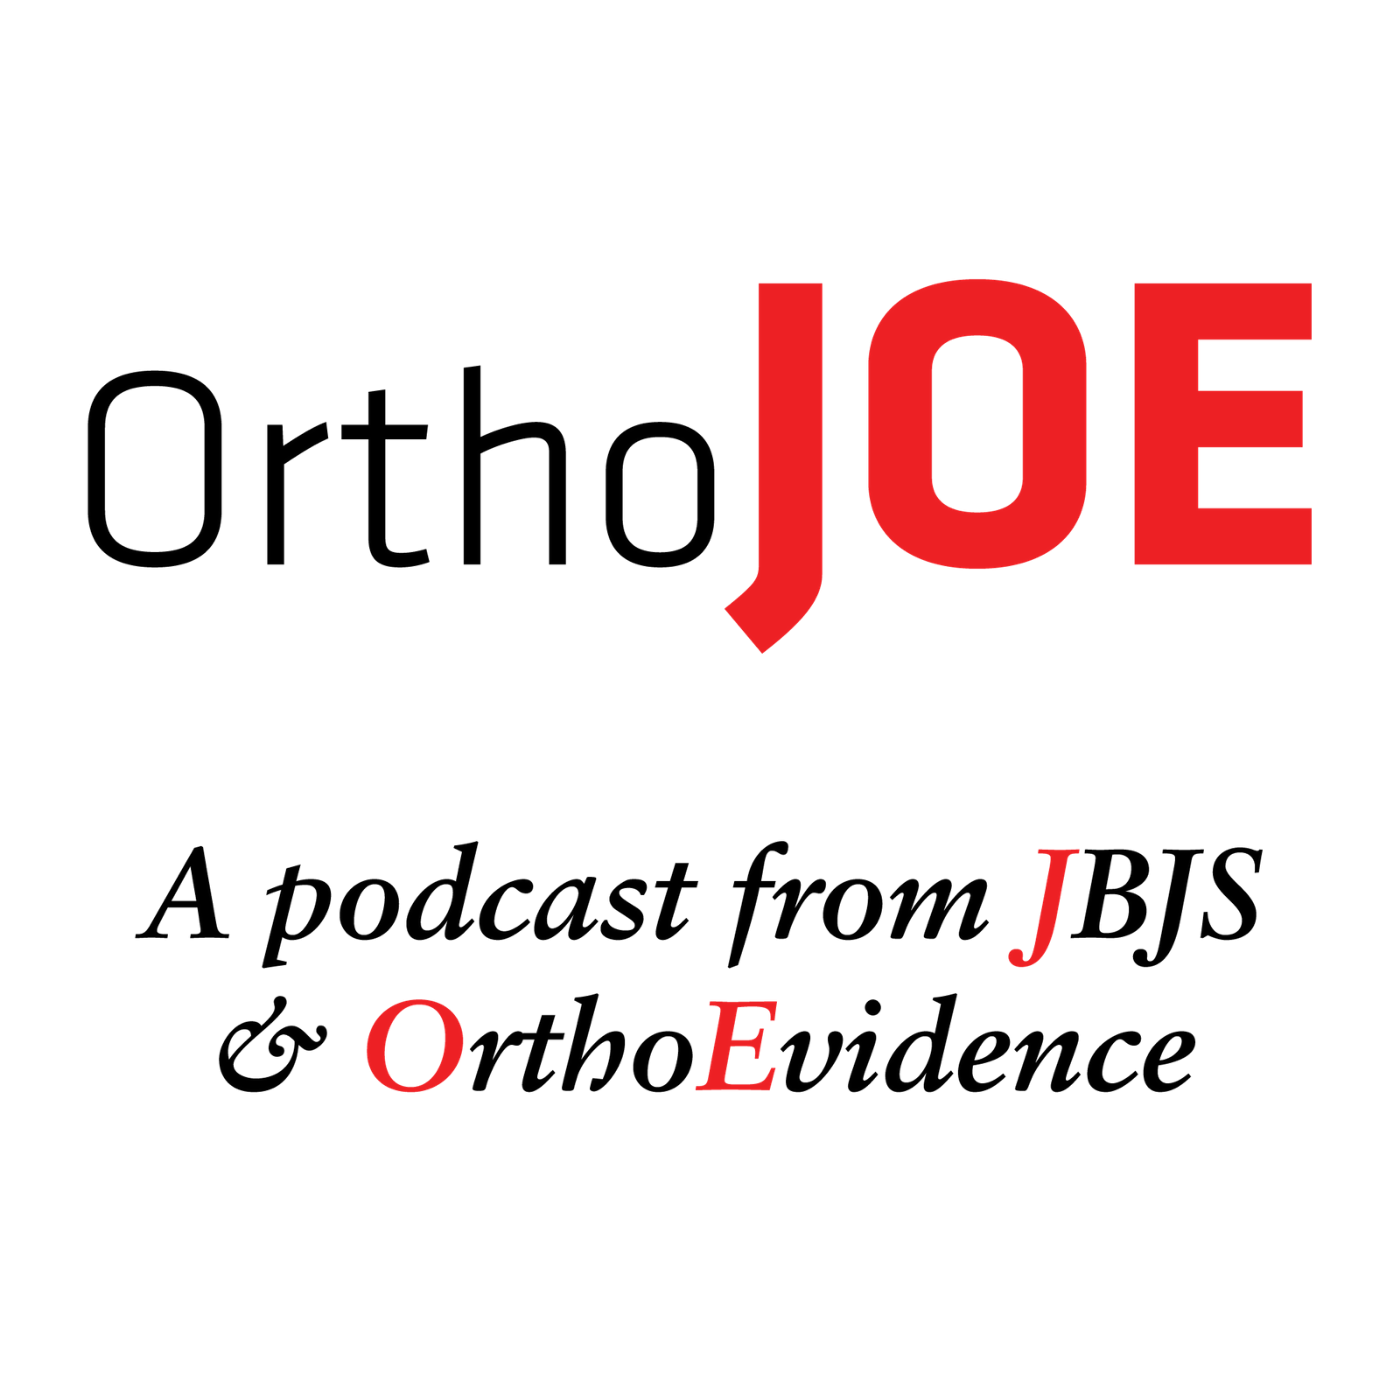 Orthopaedics in the Developing World, with special guest Theodore Miclau, MD